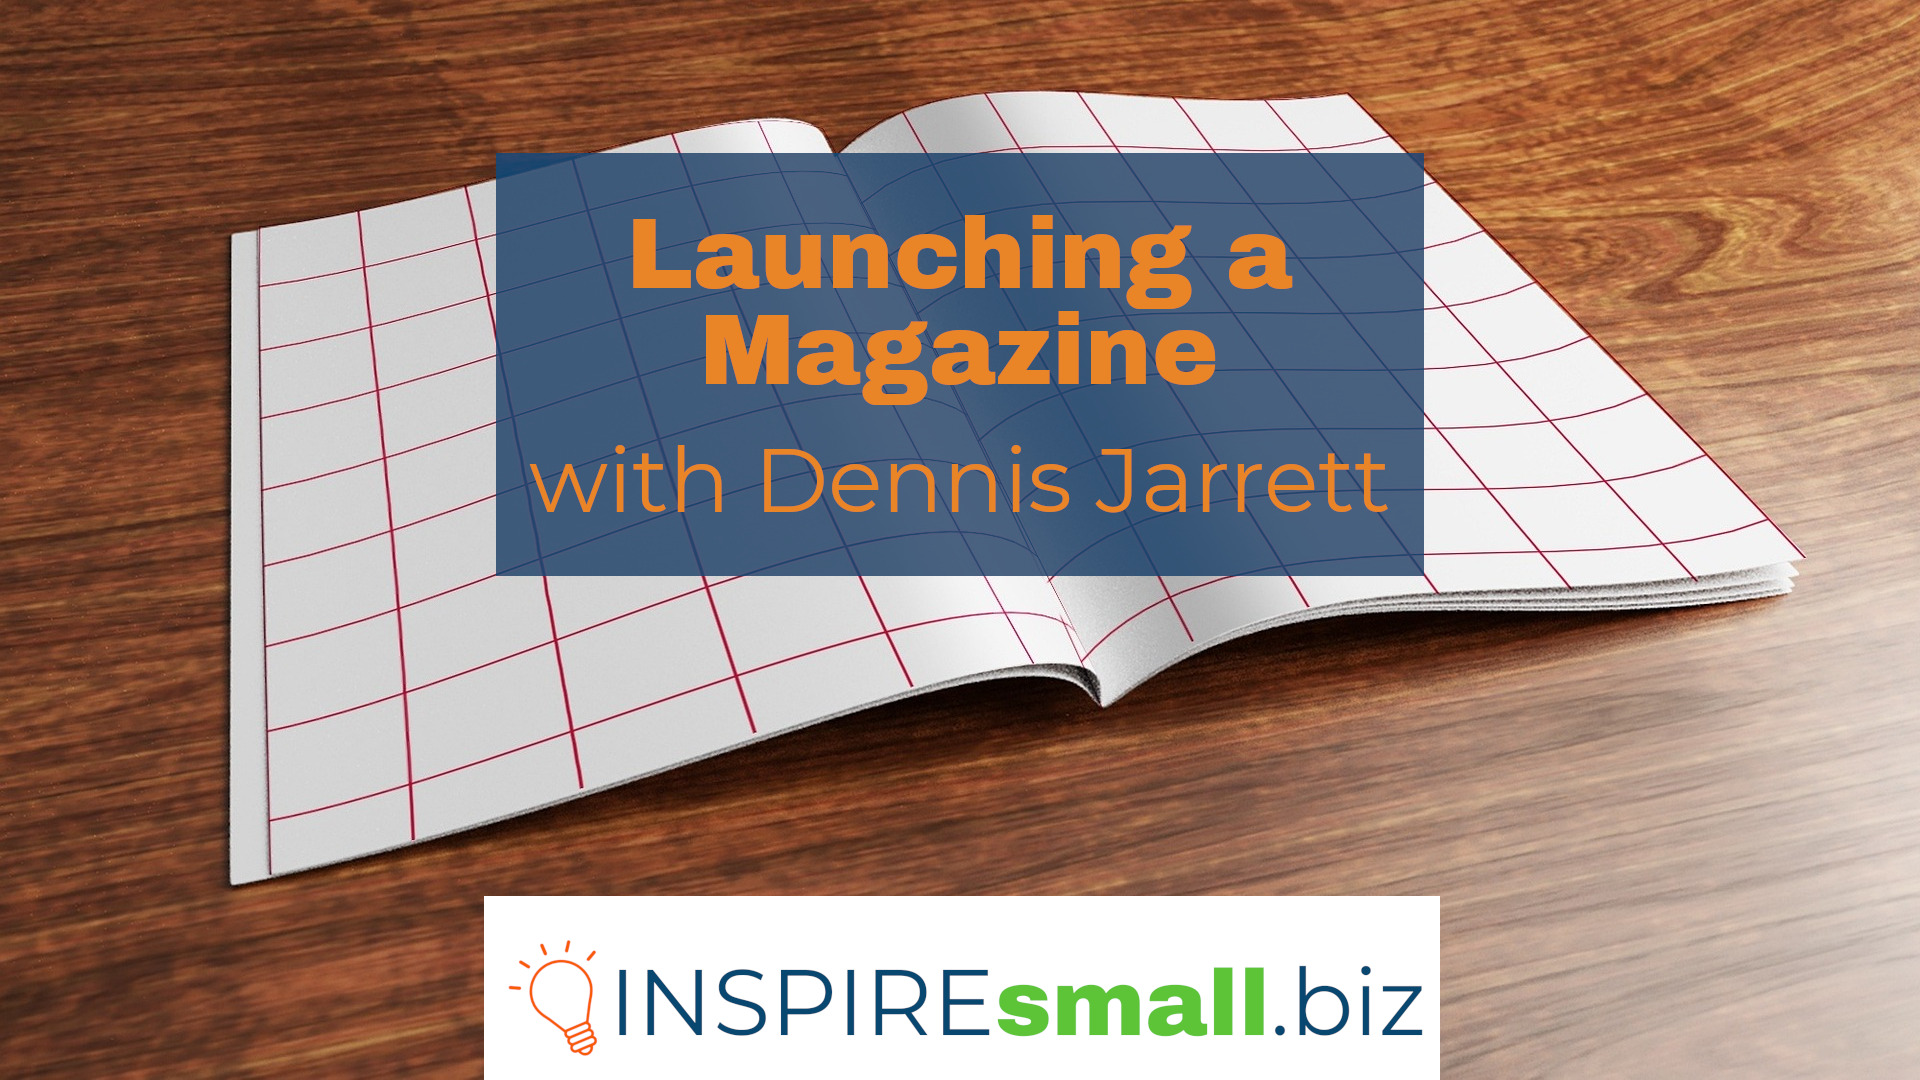 Launching a Magazine with Dennis Jarrett, hosted by INSPIREsmall.biz